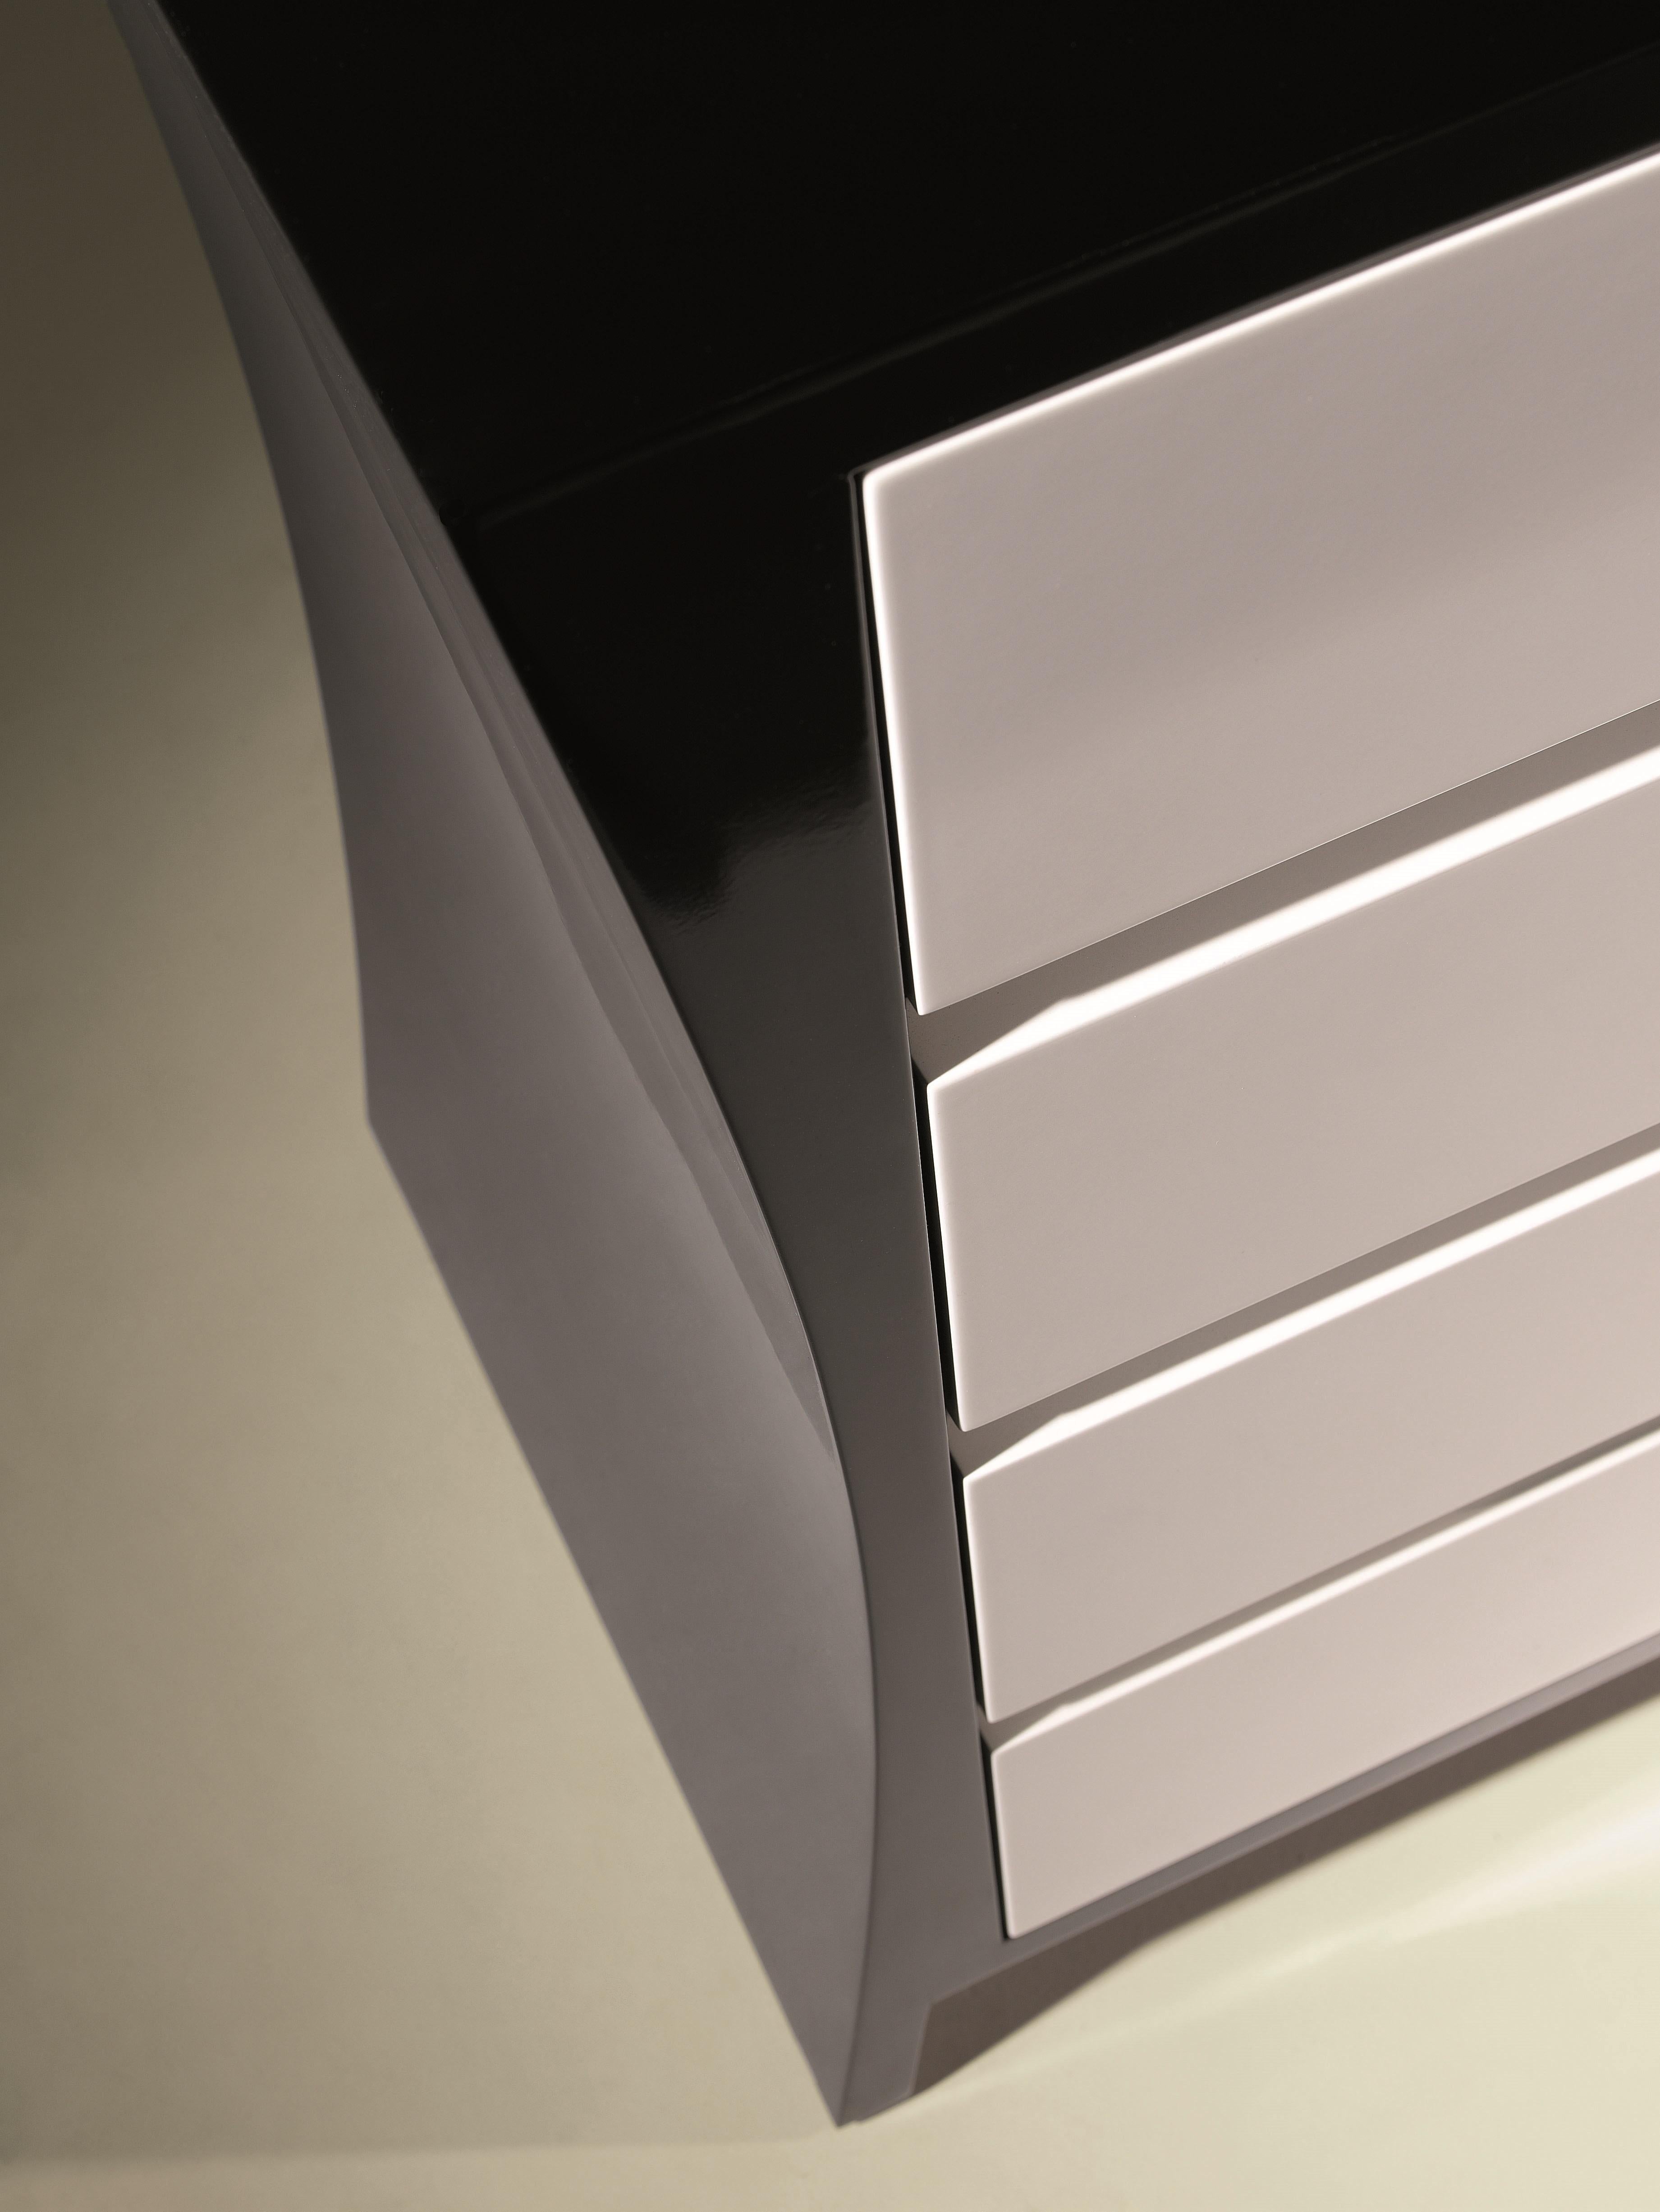 Chest of drawers in lacquer black and white.

Bespoke / Customizable
Identical shapes with different sizes and finishings.
All RAL colors available. (Mate / Half Gloss / Gloss).